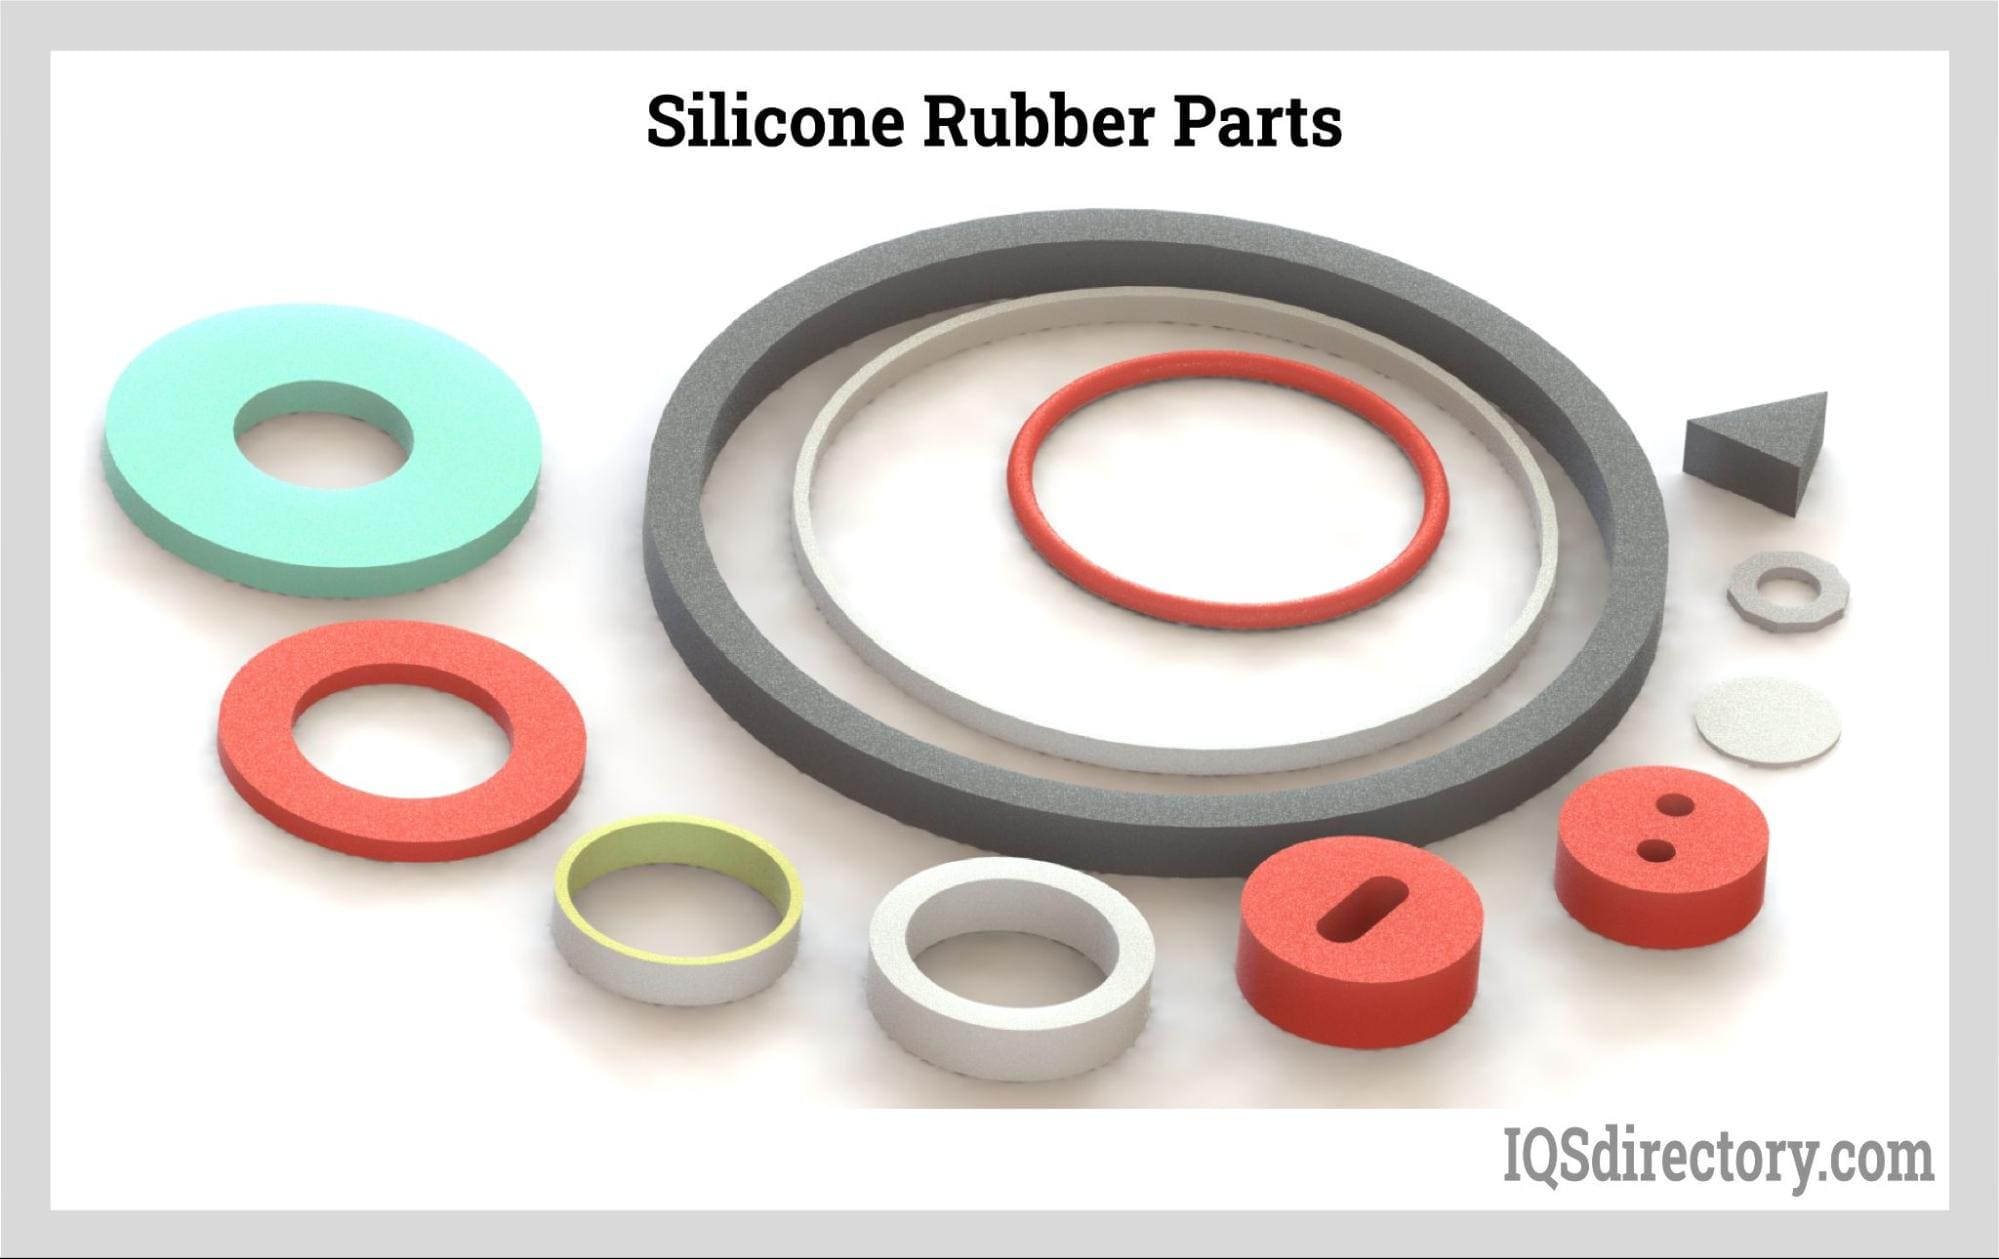 Silicone Rubber Molding: Types, Materials, Processes & Uses